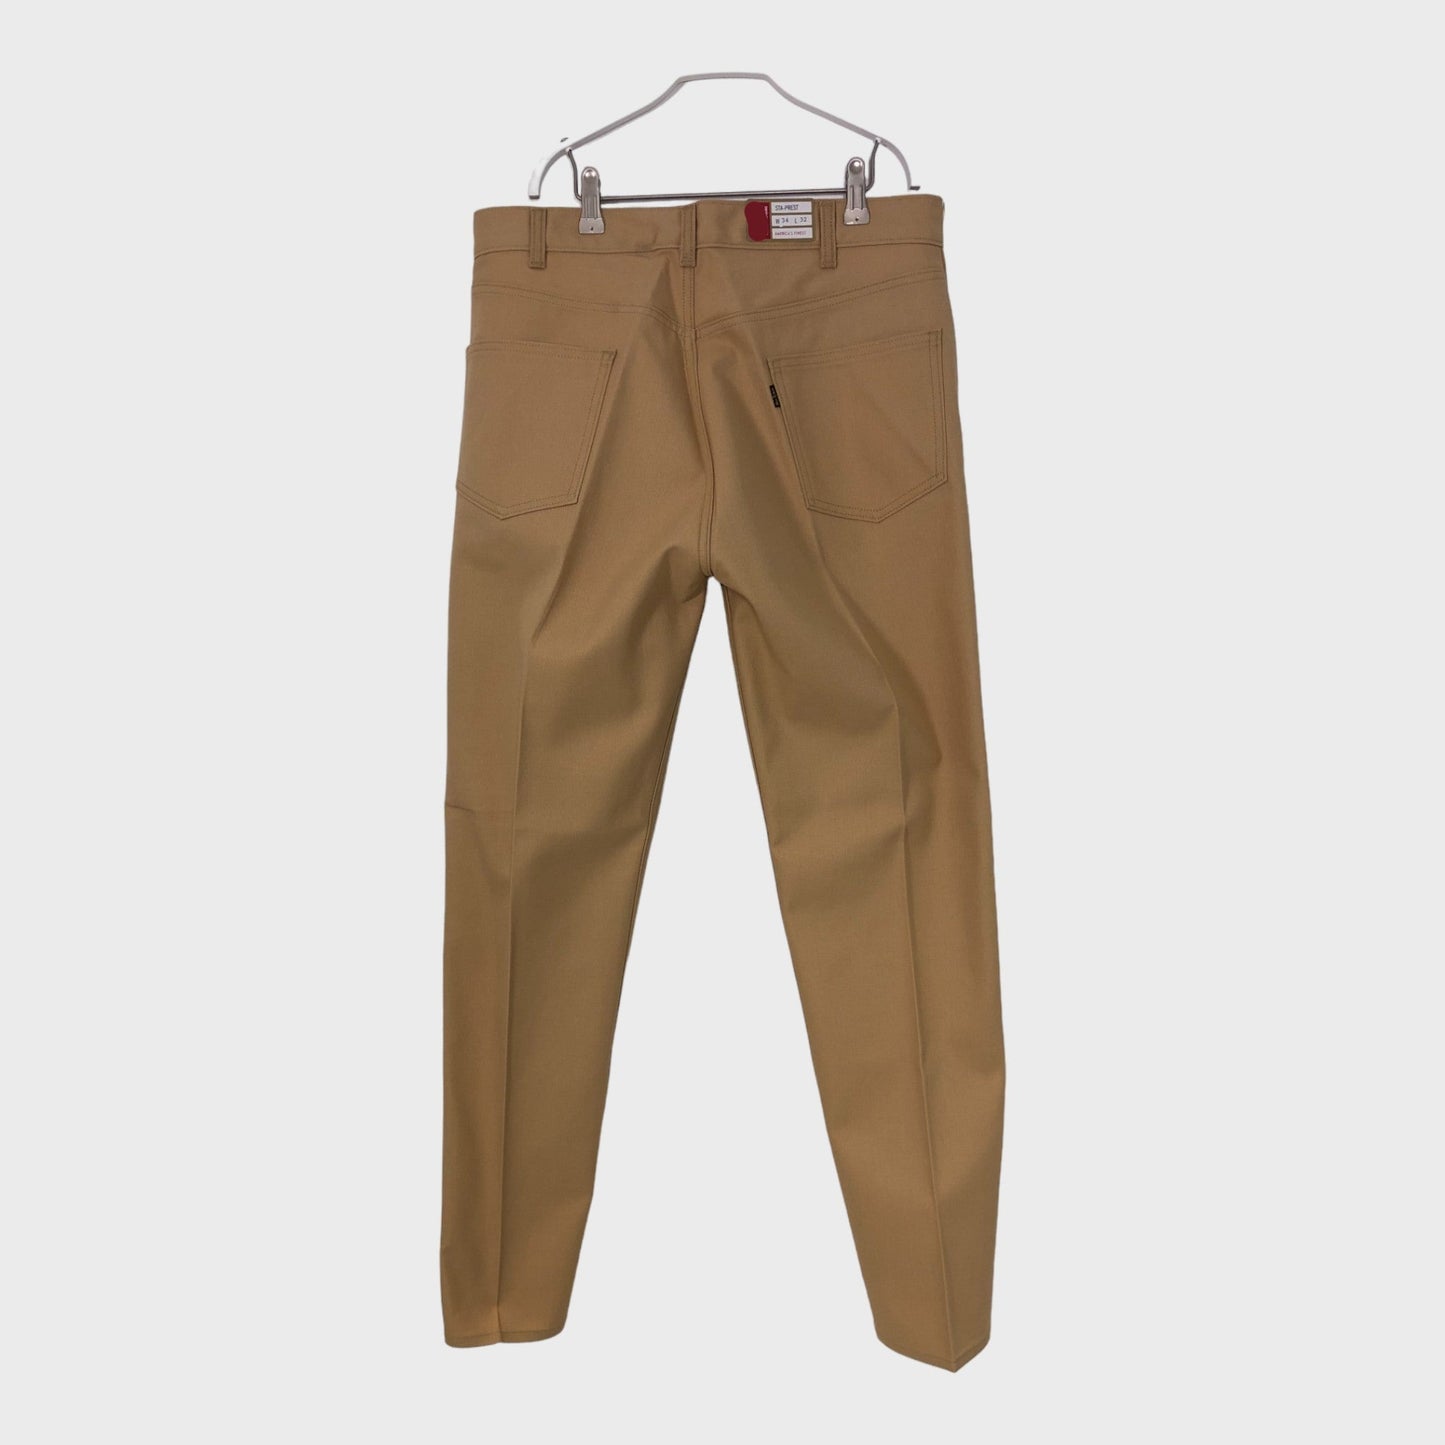 Branded Sta-Prest Trousers